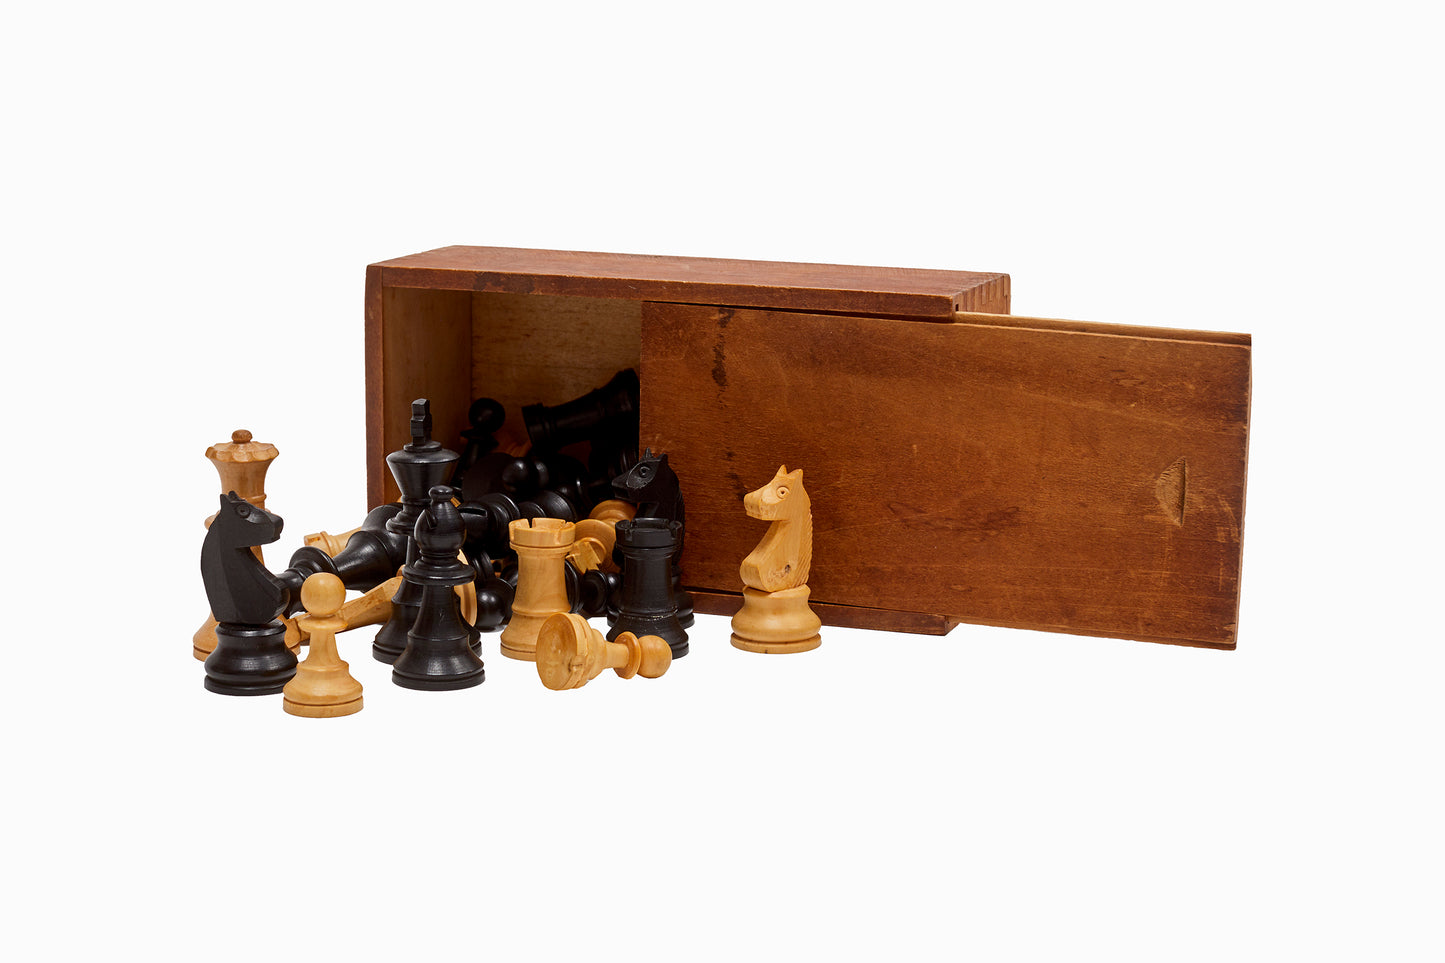 VIntage chess set and board